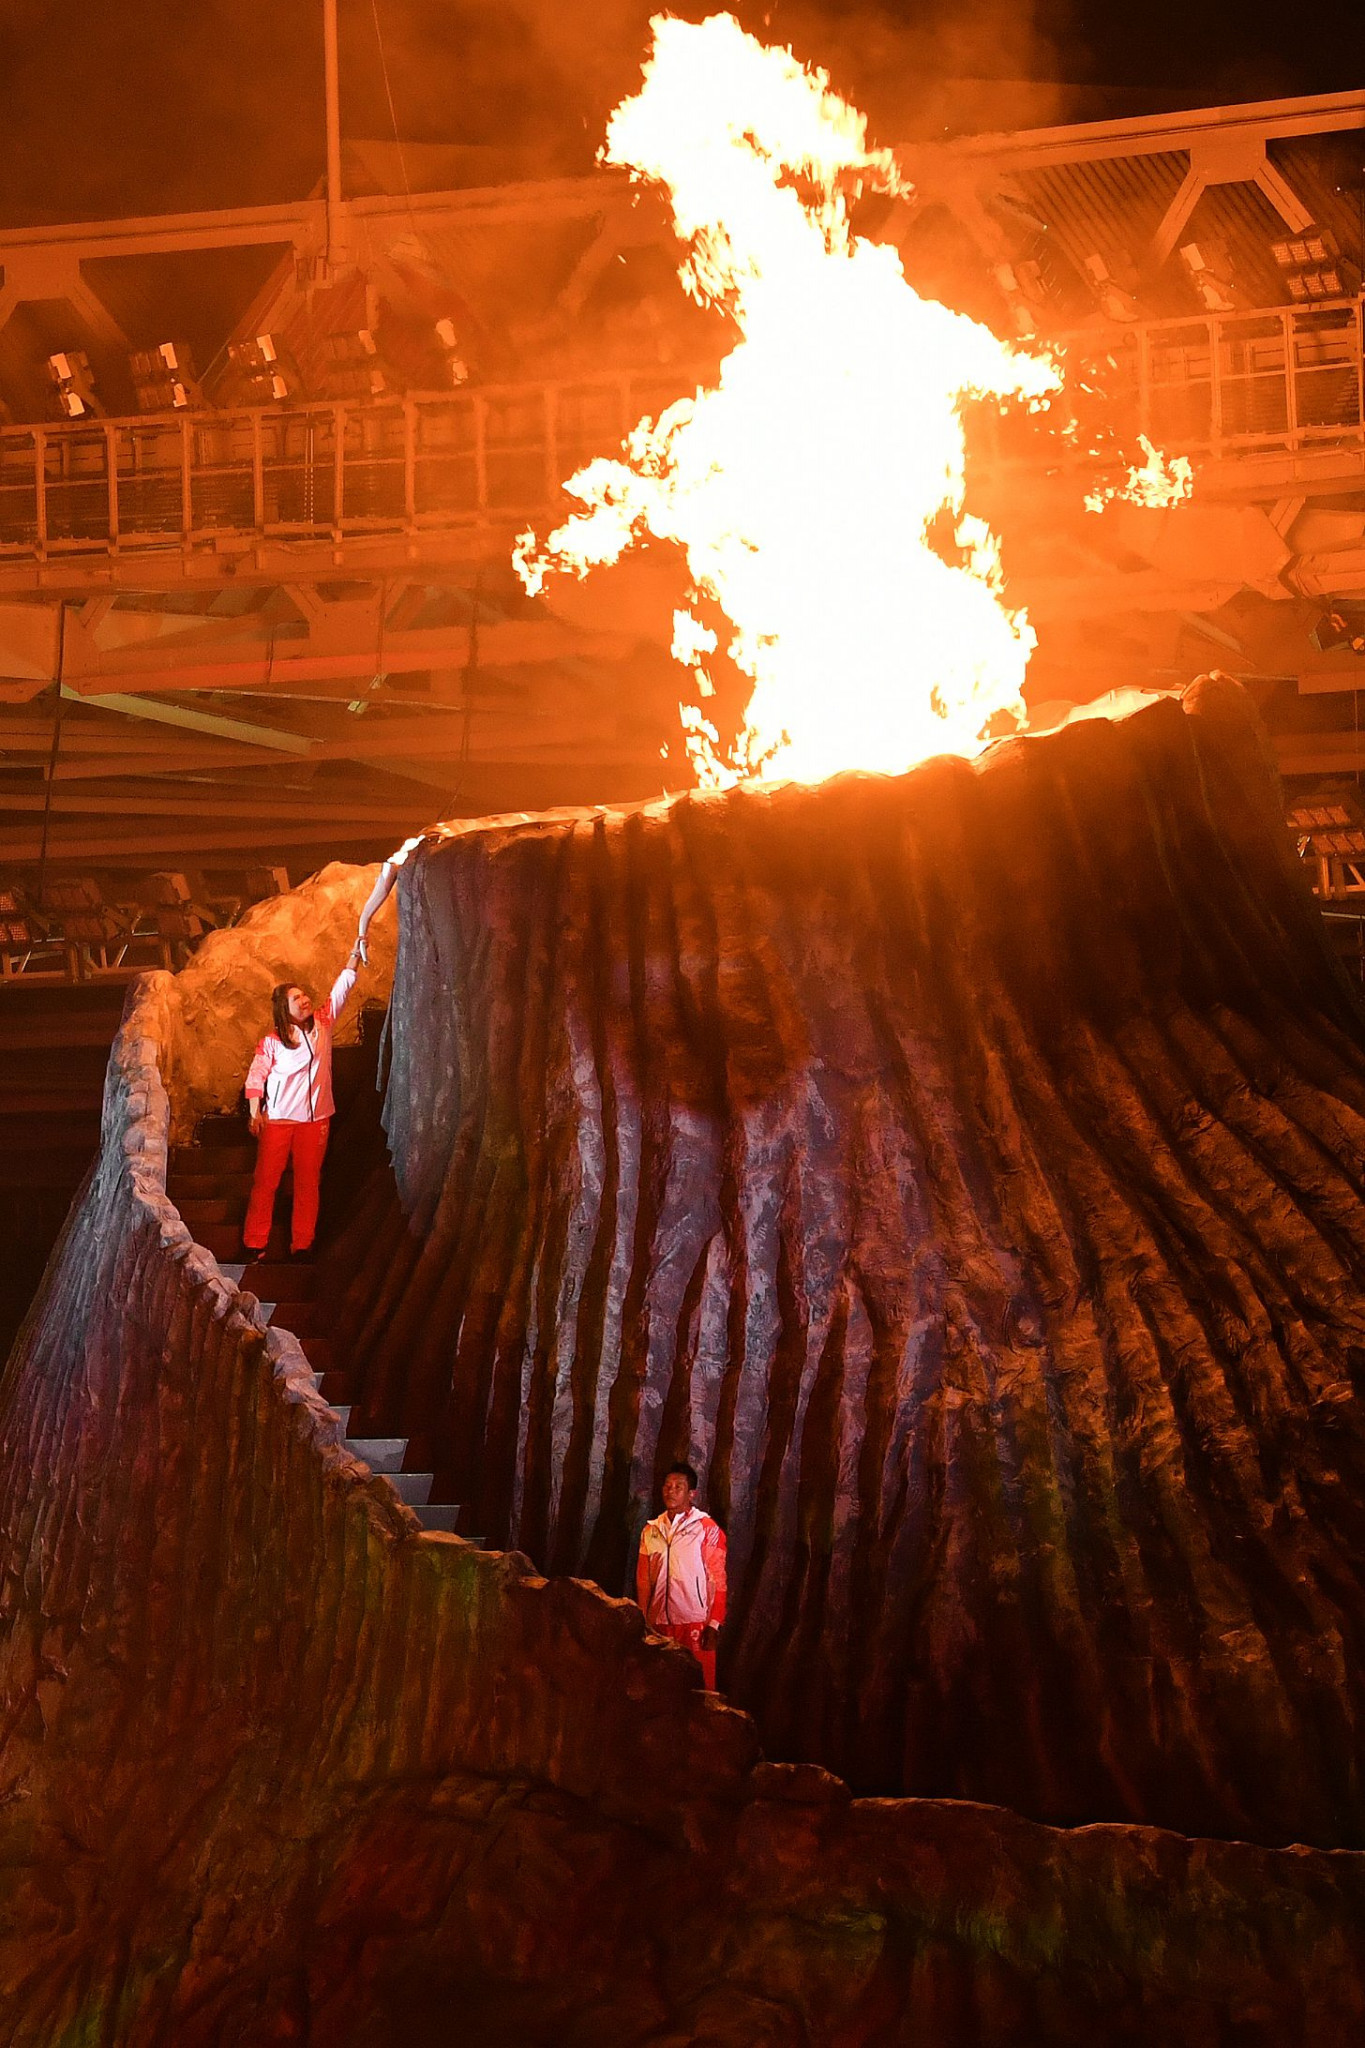 The cauldron, which was made to look like a volcano built into the stage, was lit by former Indonesian badminton star Susi Susanti, a two-time Asian Games bronze medallist ©Getty Images